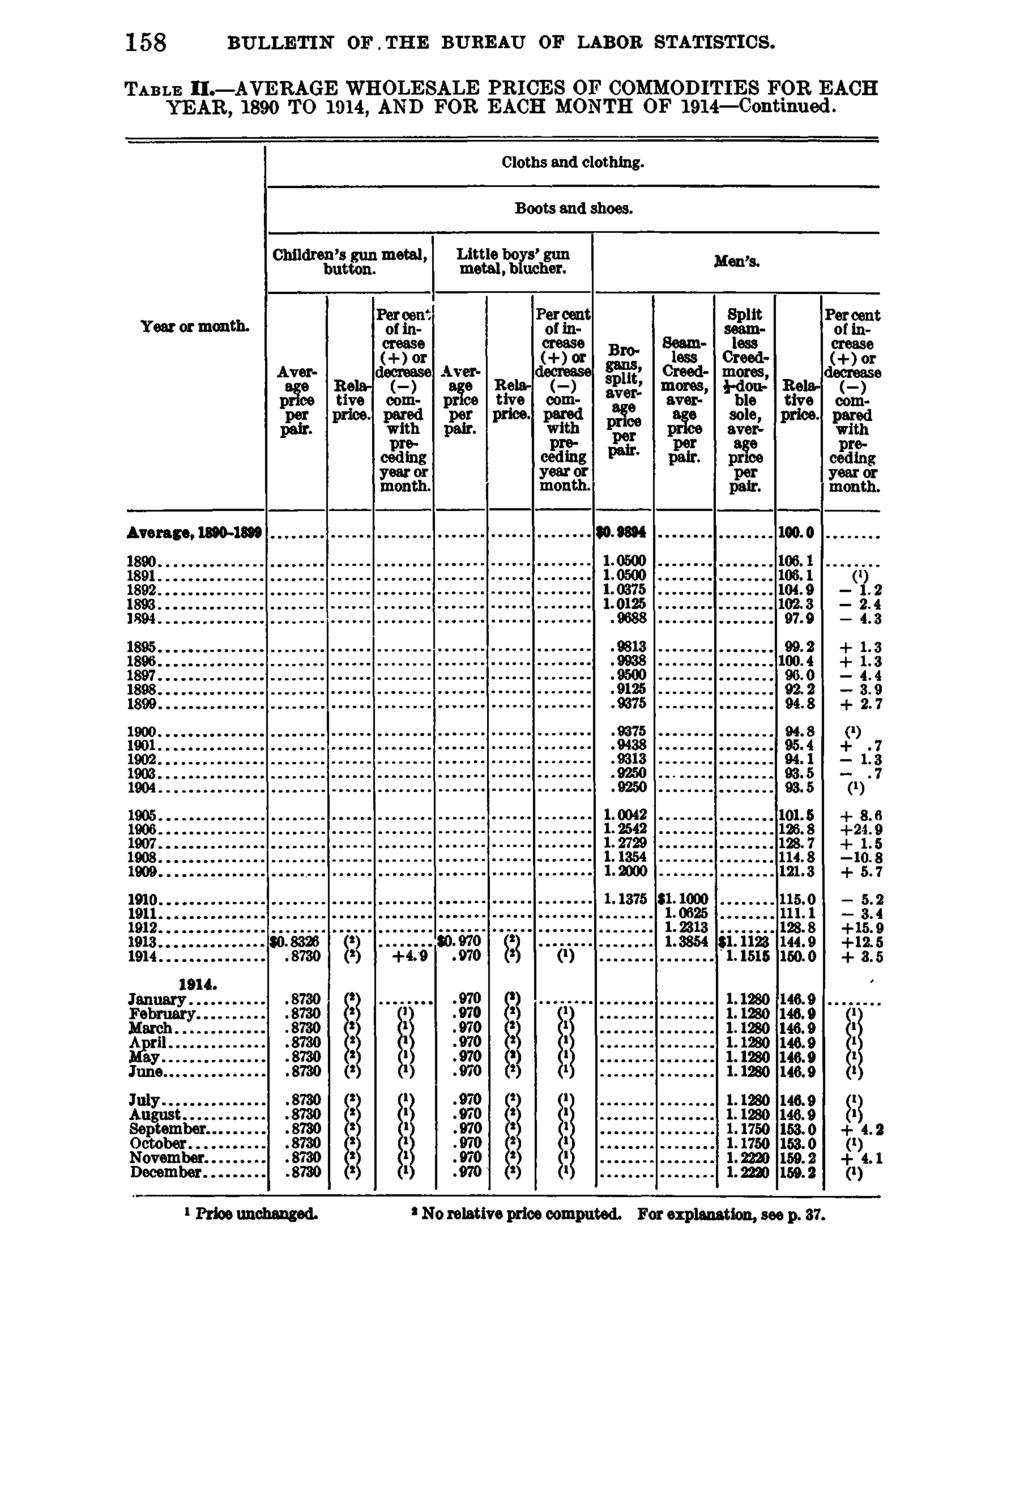 158 BULLETIN OF.THE BUREAU OF LABOR STATISTICS. T a b l e II. AVERAGE WHOLESALE PRICES OF COMMODITIES FOR EACH YEAR, 1890 TO 1914, AND FOR EACH MONTH OF 1914 Continued. Cloths and clothing.